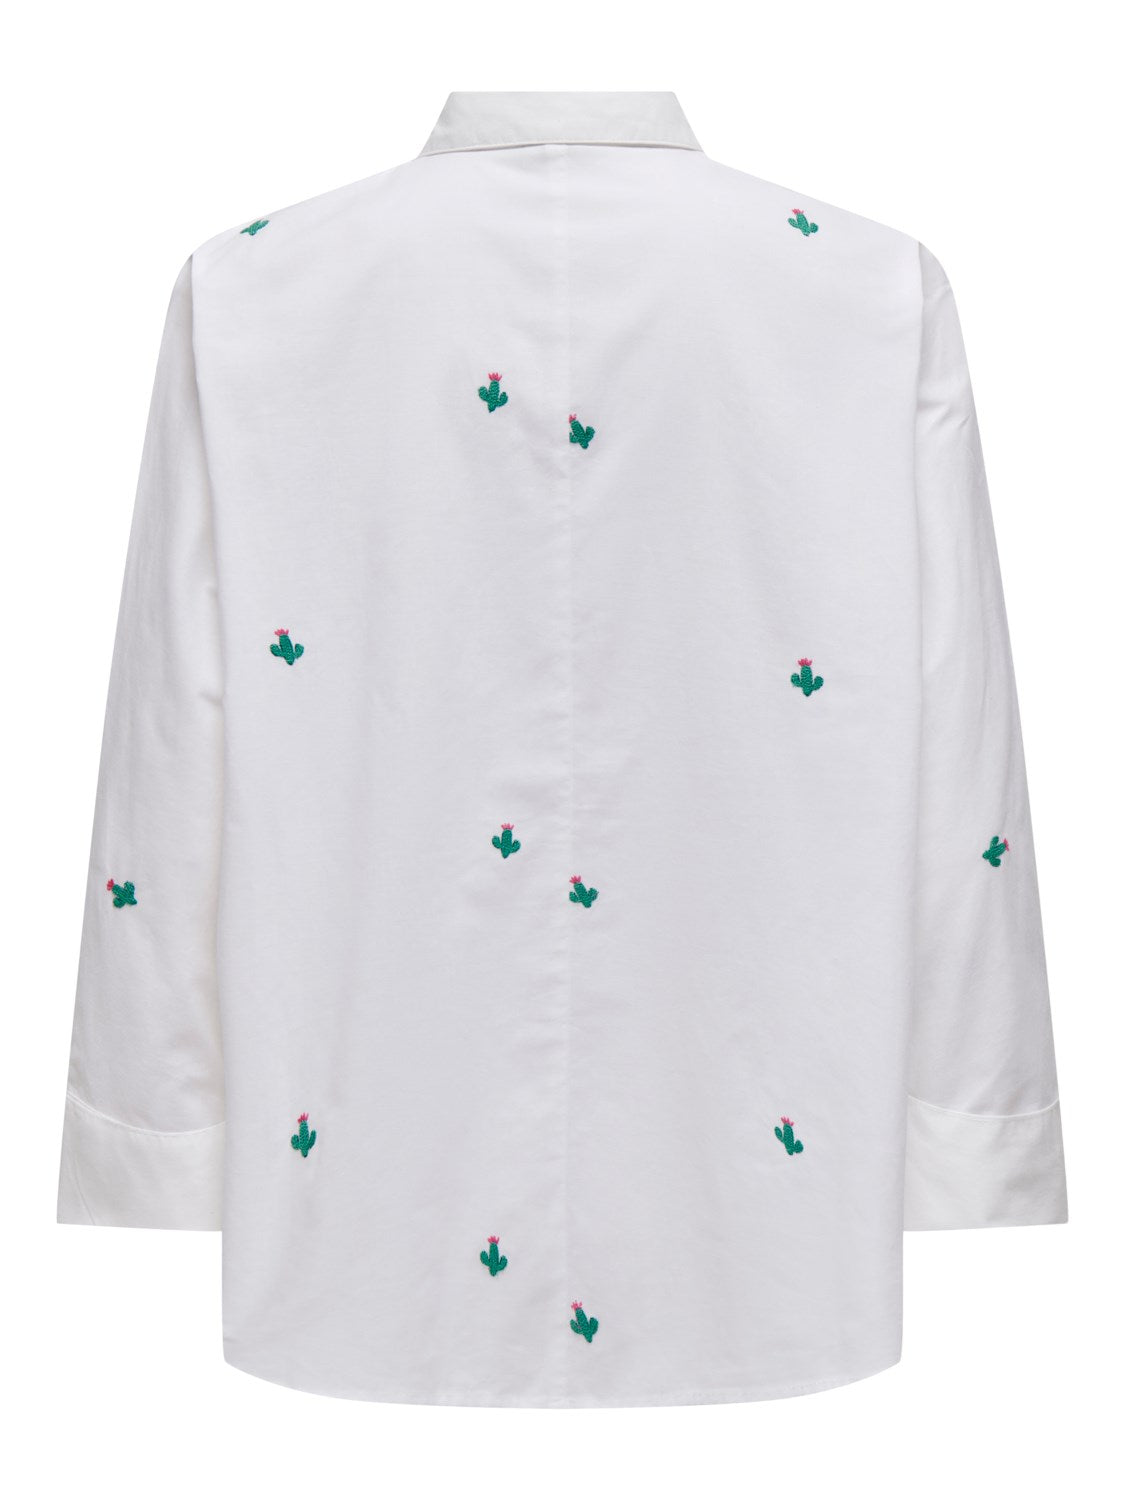 Only - White Shirt with Embroidered Cacti